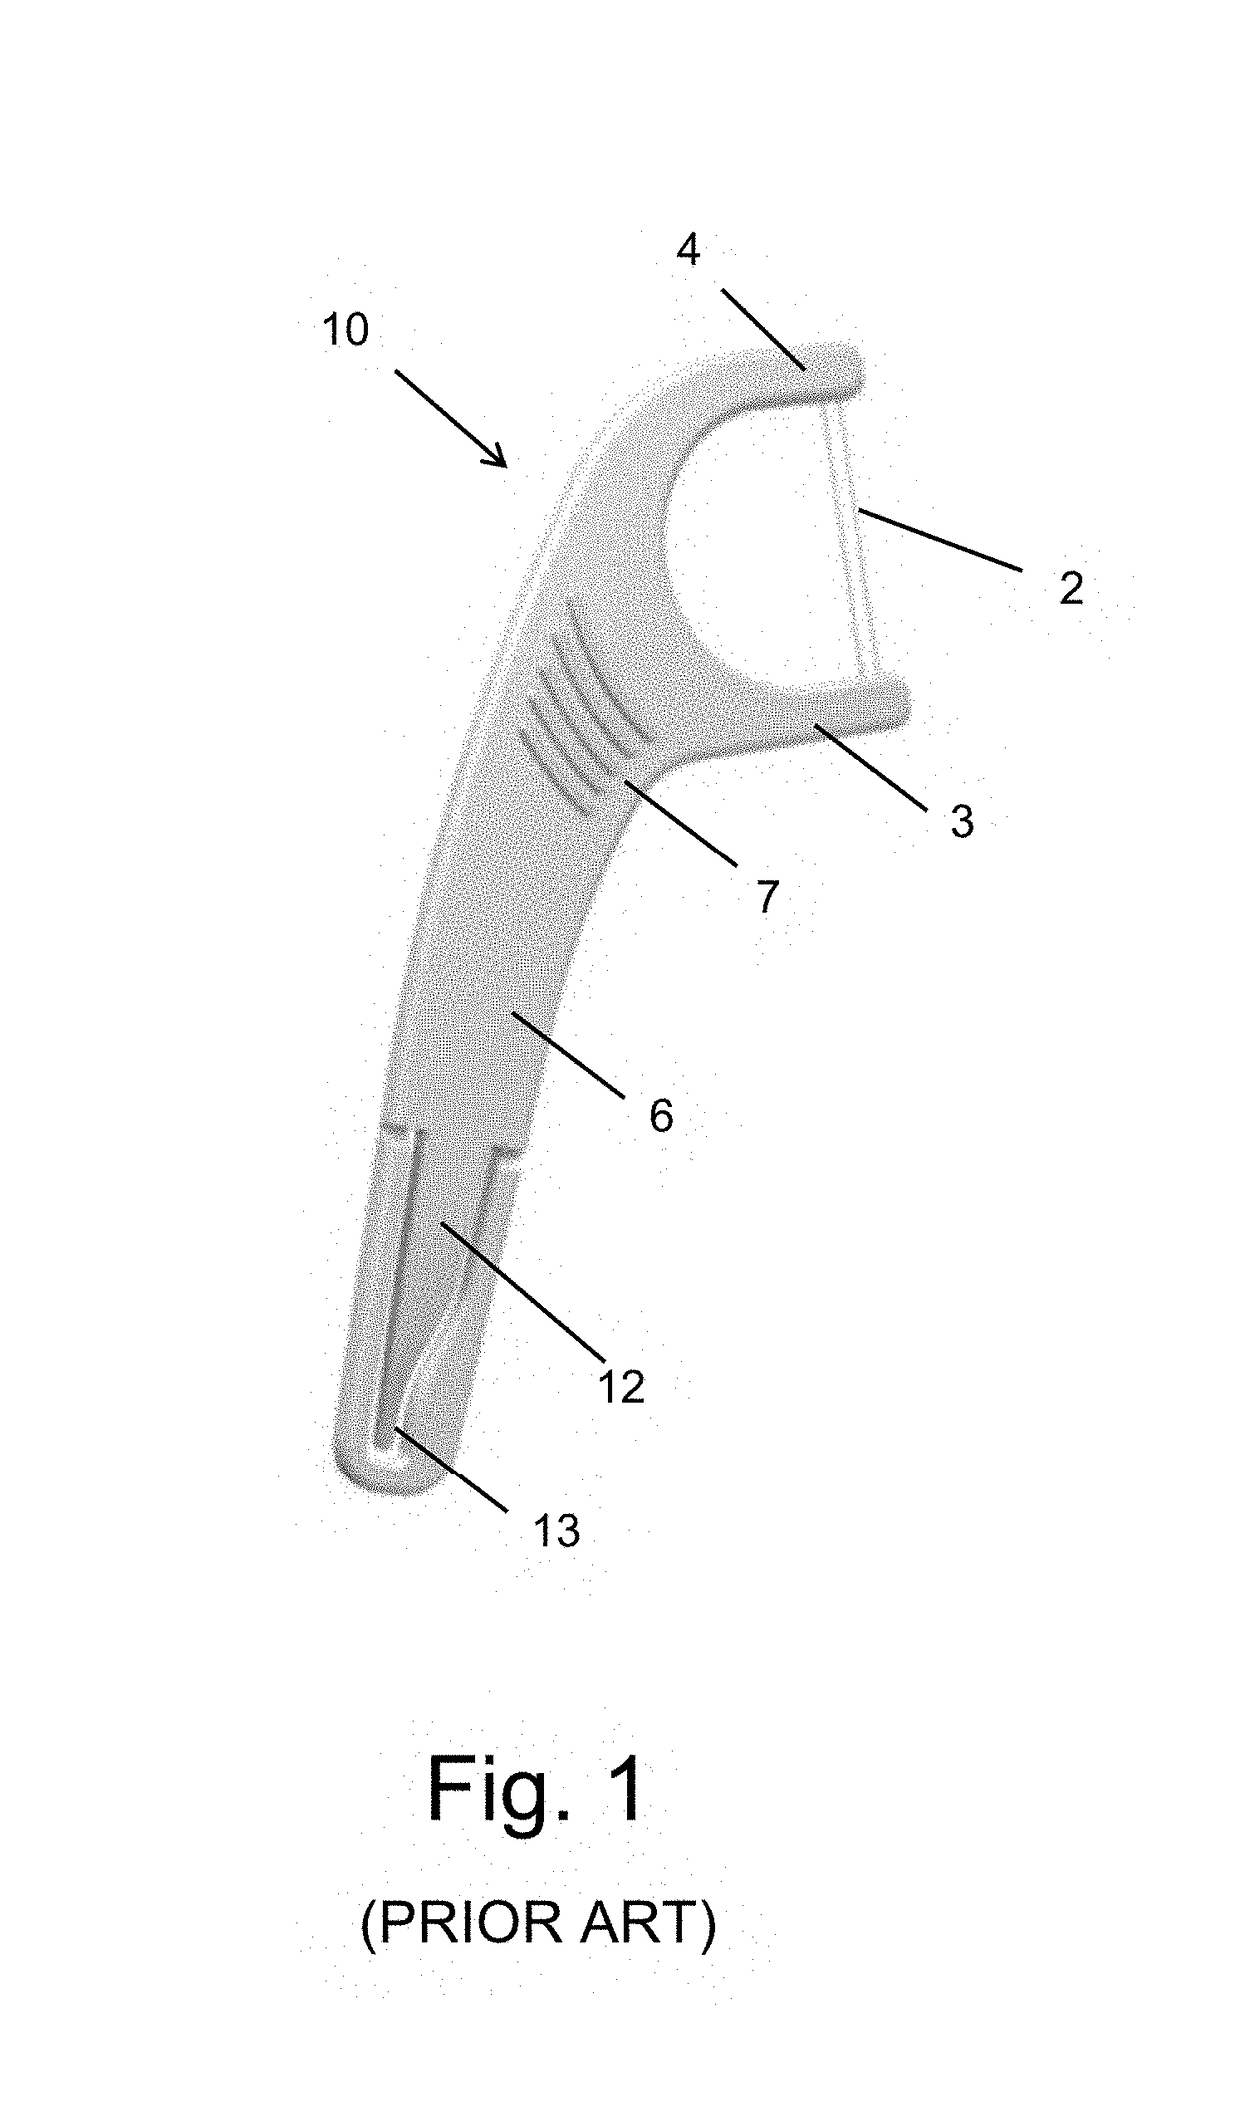 Adjustable interdental cleaning element and a device and method therefor